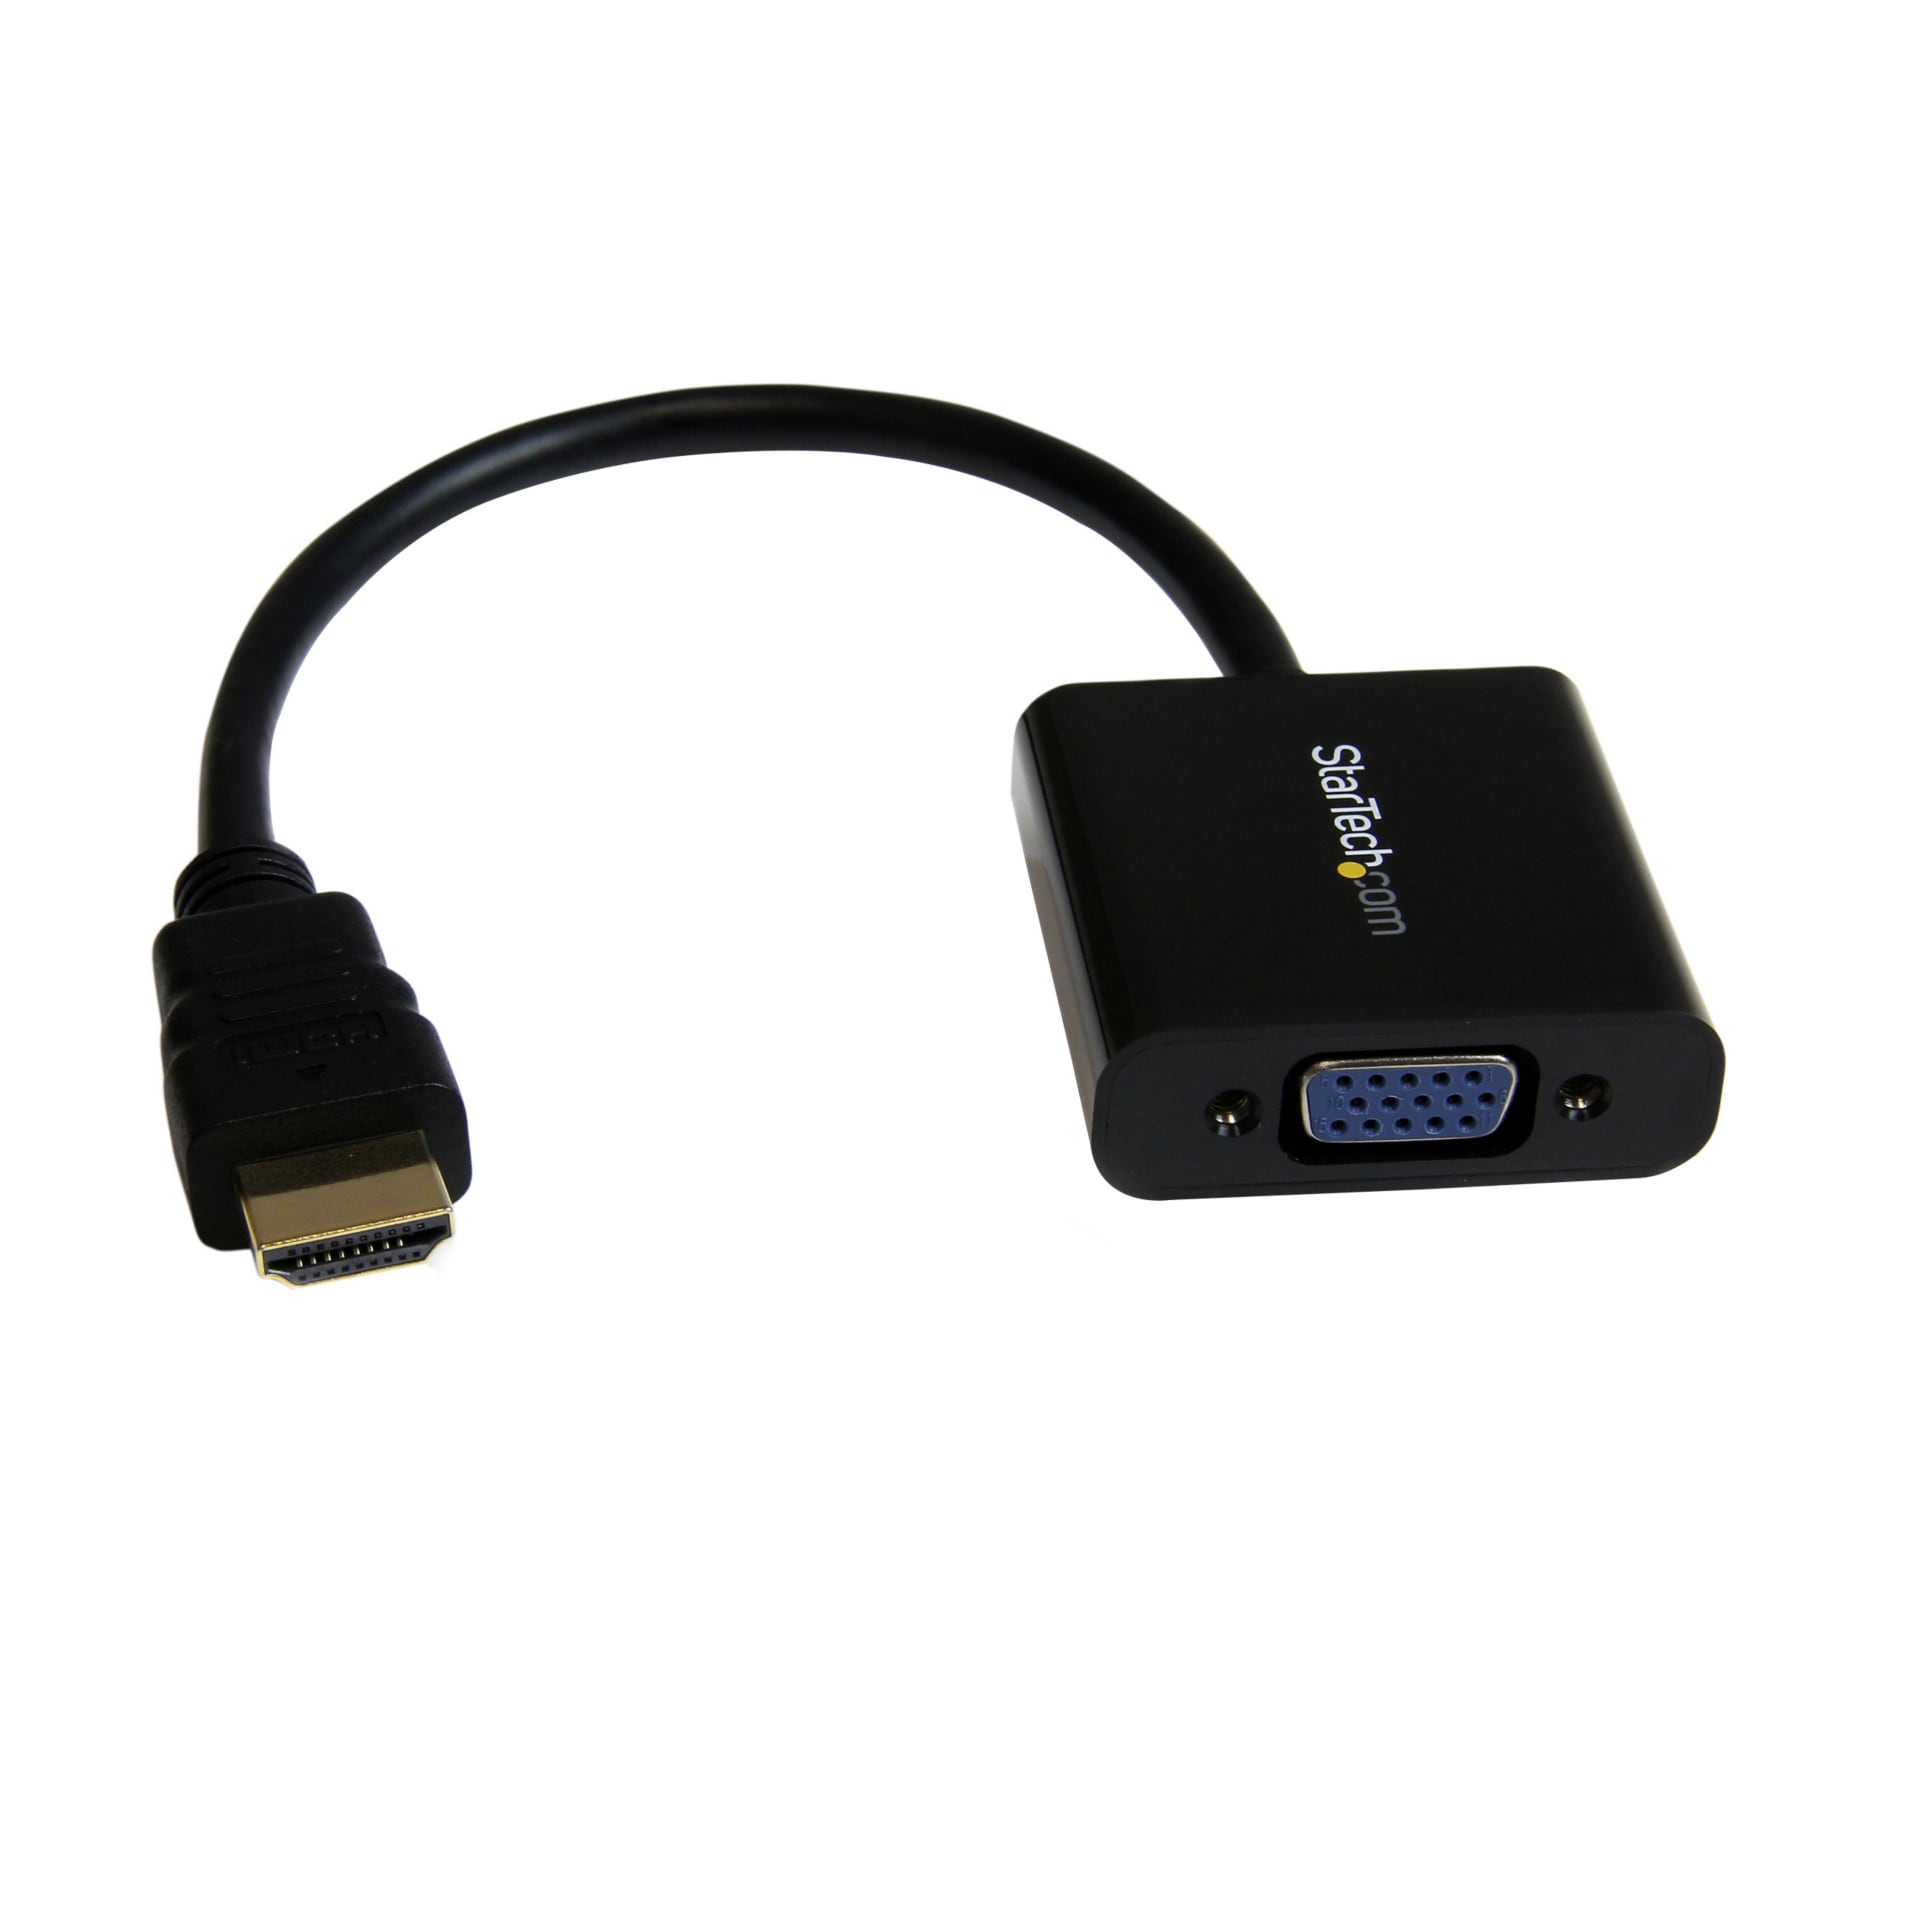 Isolator Aanvulling Spektakel StarTech.com HDMI to VGA Adapter - Active Monitor Converter Cable - 1080p -  HD2VGAE2 - Monitor Cables & Adapters - CDW.com